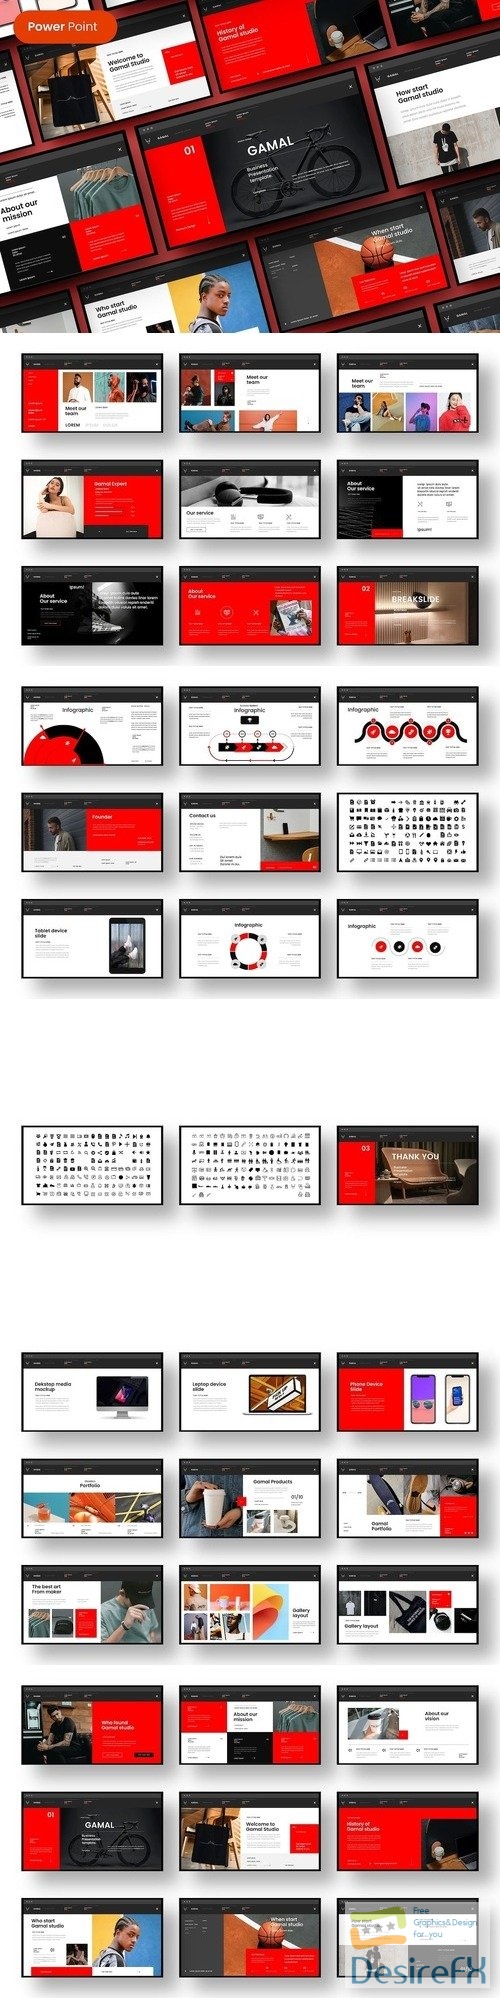 Gamal - Business PowerPoint Template